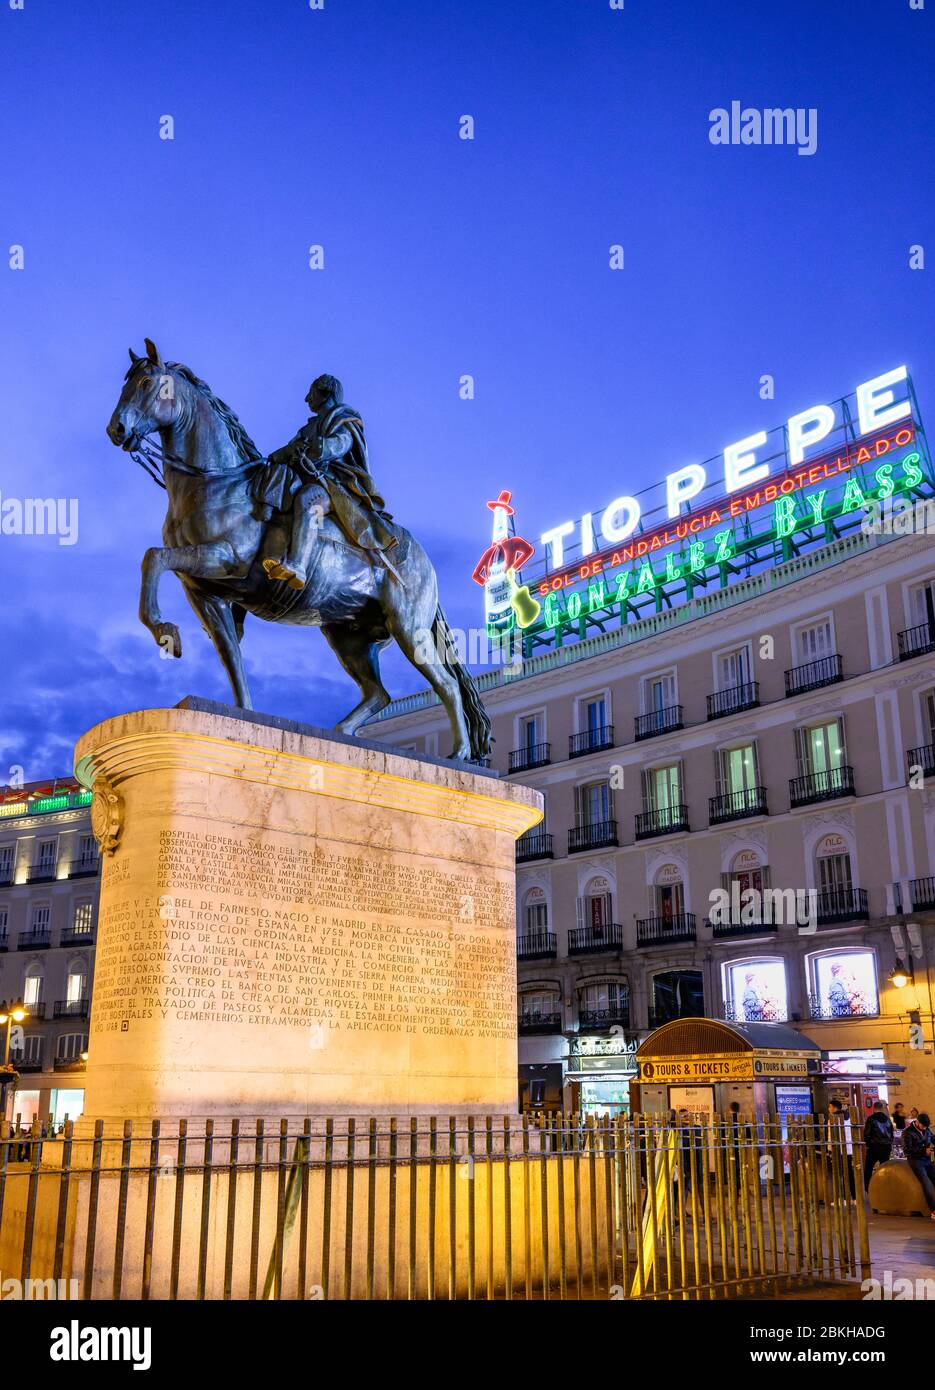 The famous Tio Pepe advertising sign looms over a statue of King Carlos III, in the Puerta del Sol,  Madrid, Spain. Stock Photo